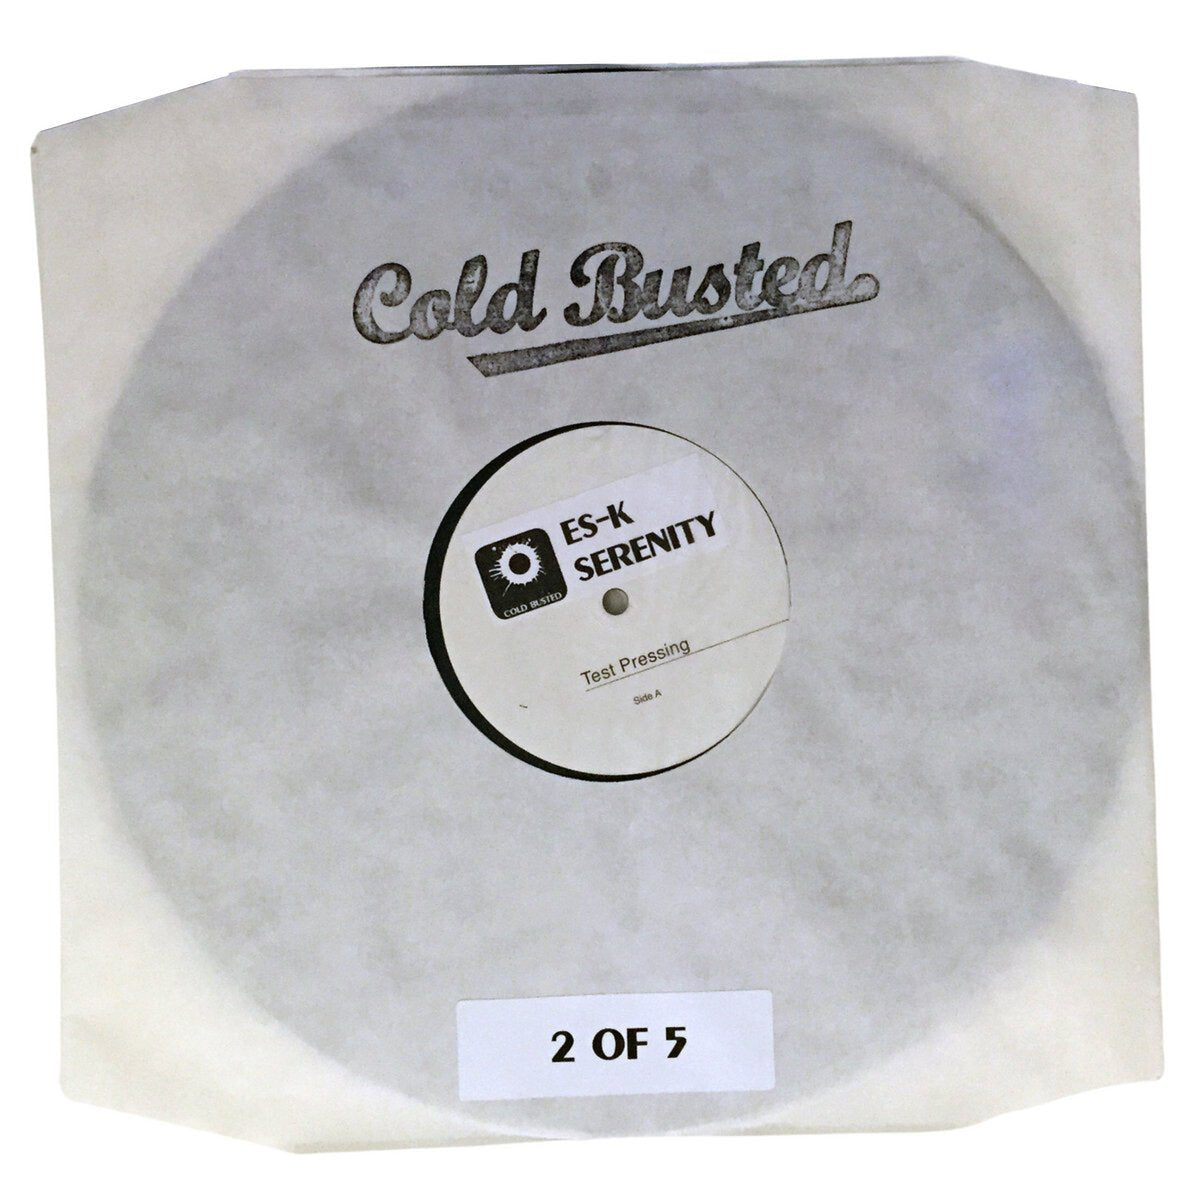 Es-K - Serenity - Limited Edition 12 Inch Vinyl Test Pressing - Cold Busted